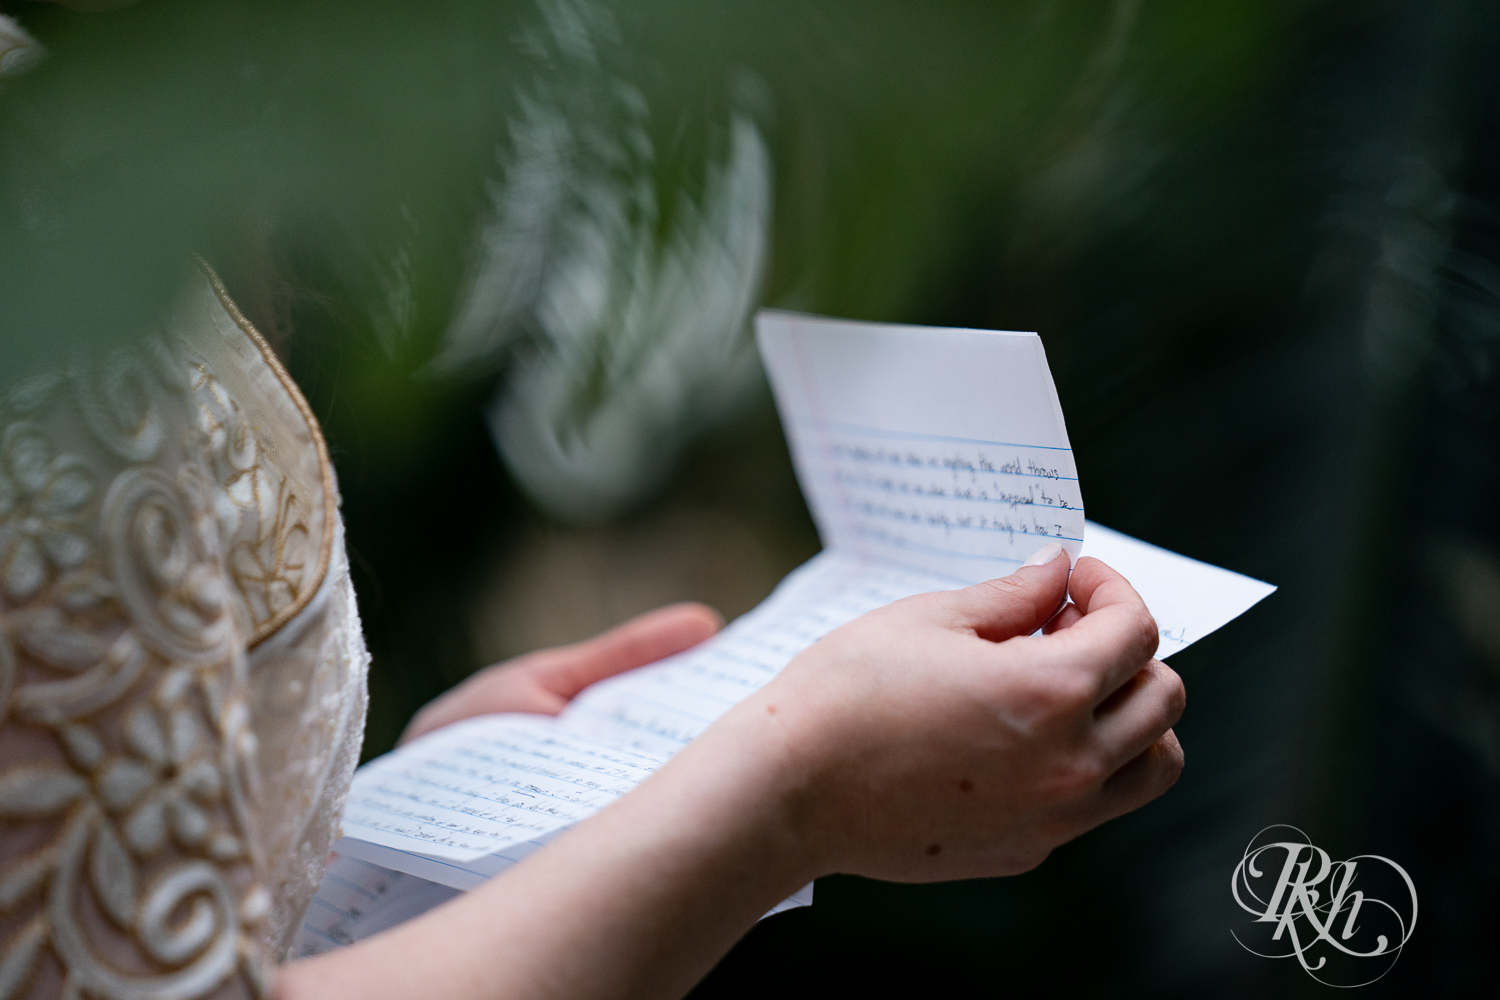 Bride reading vow at Indian wedding at Como Zoo Conservatory in Saint Paul, Minnesota.